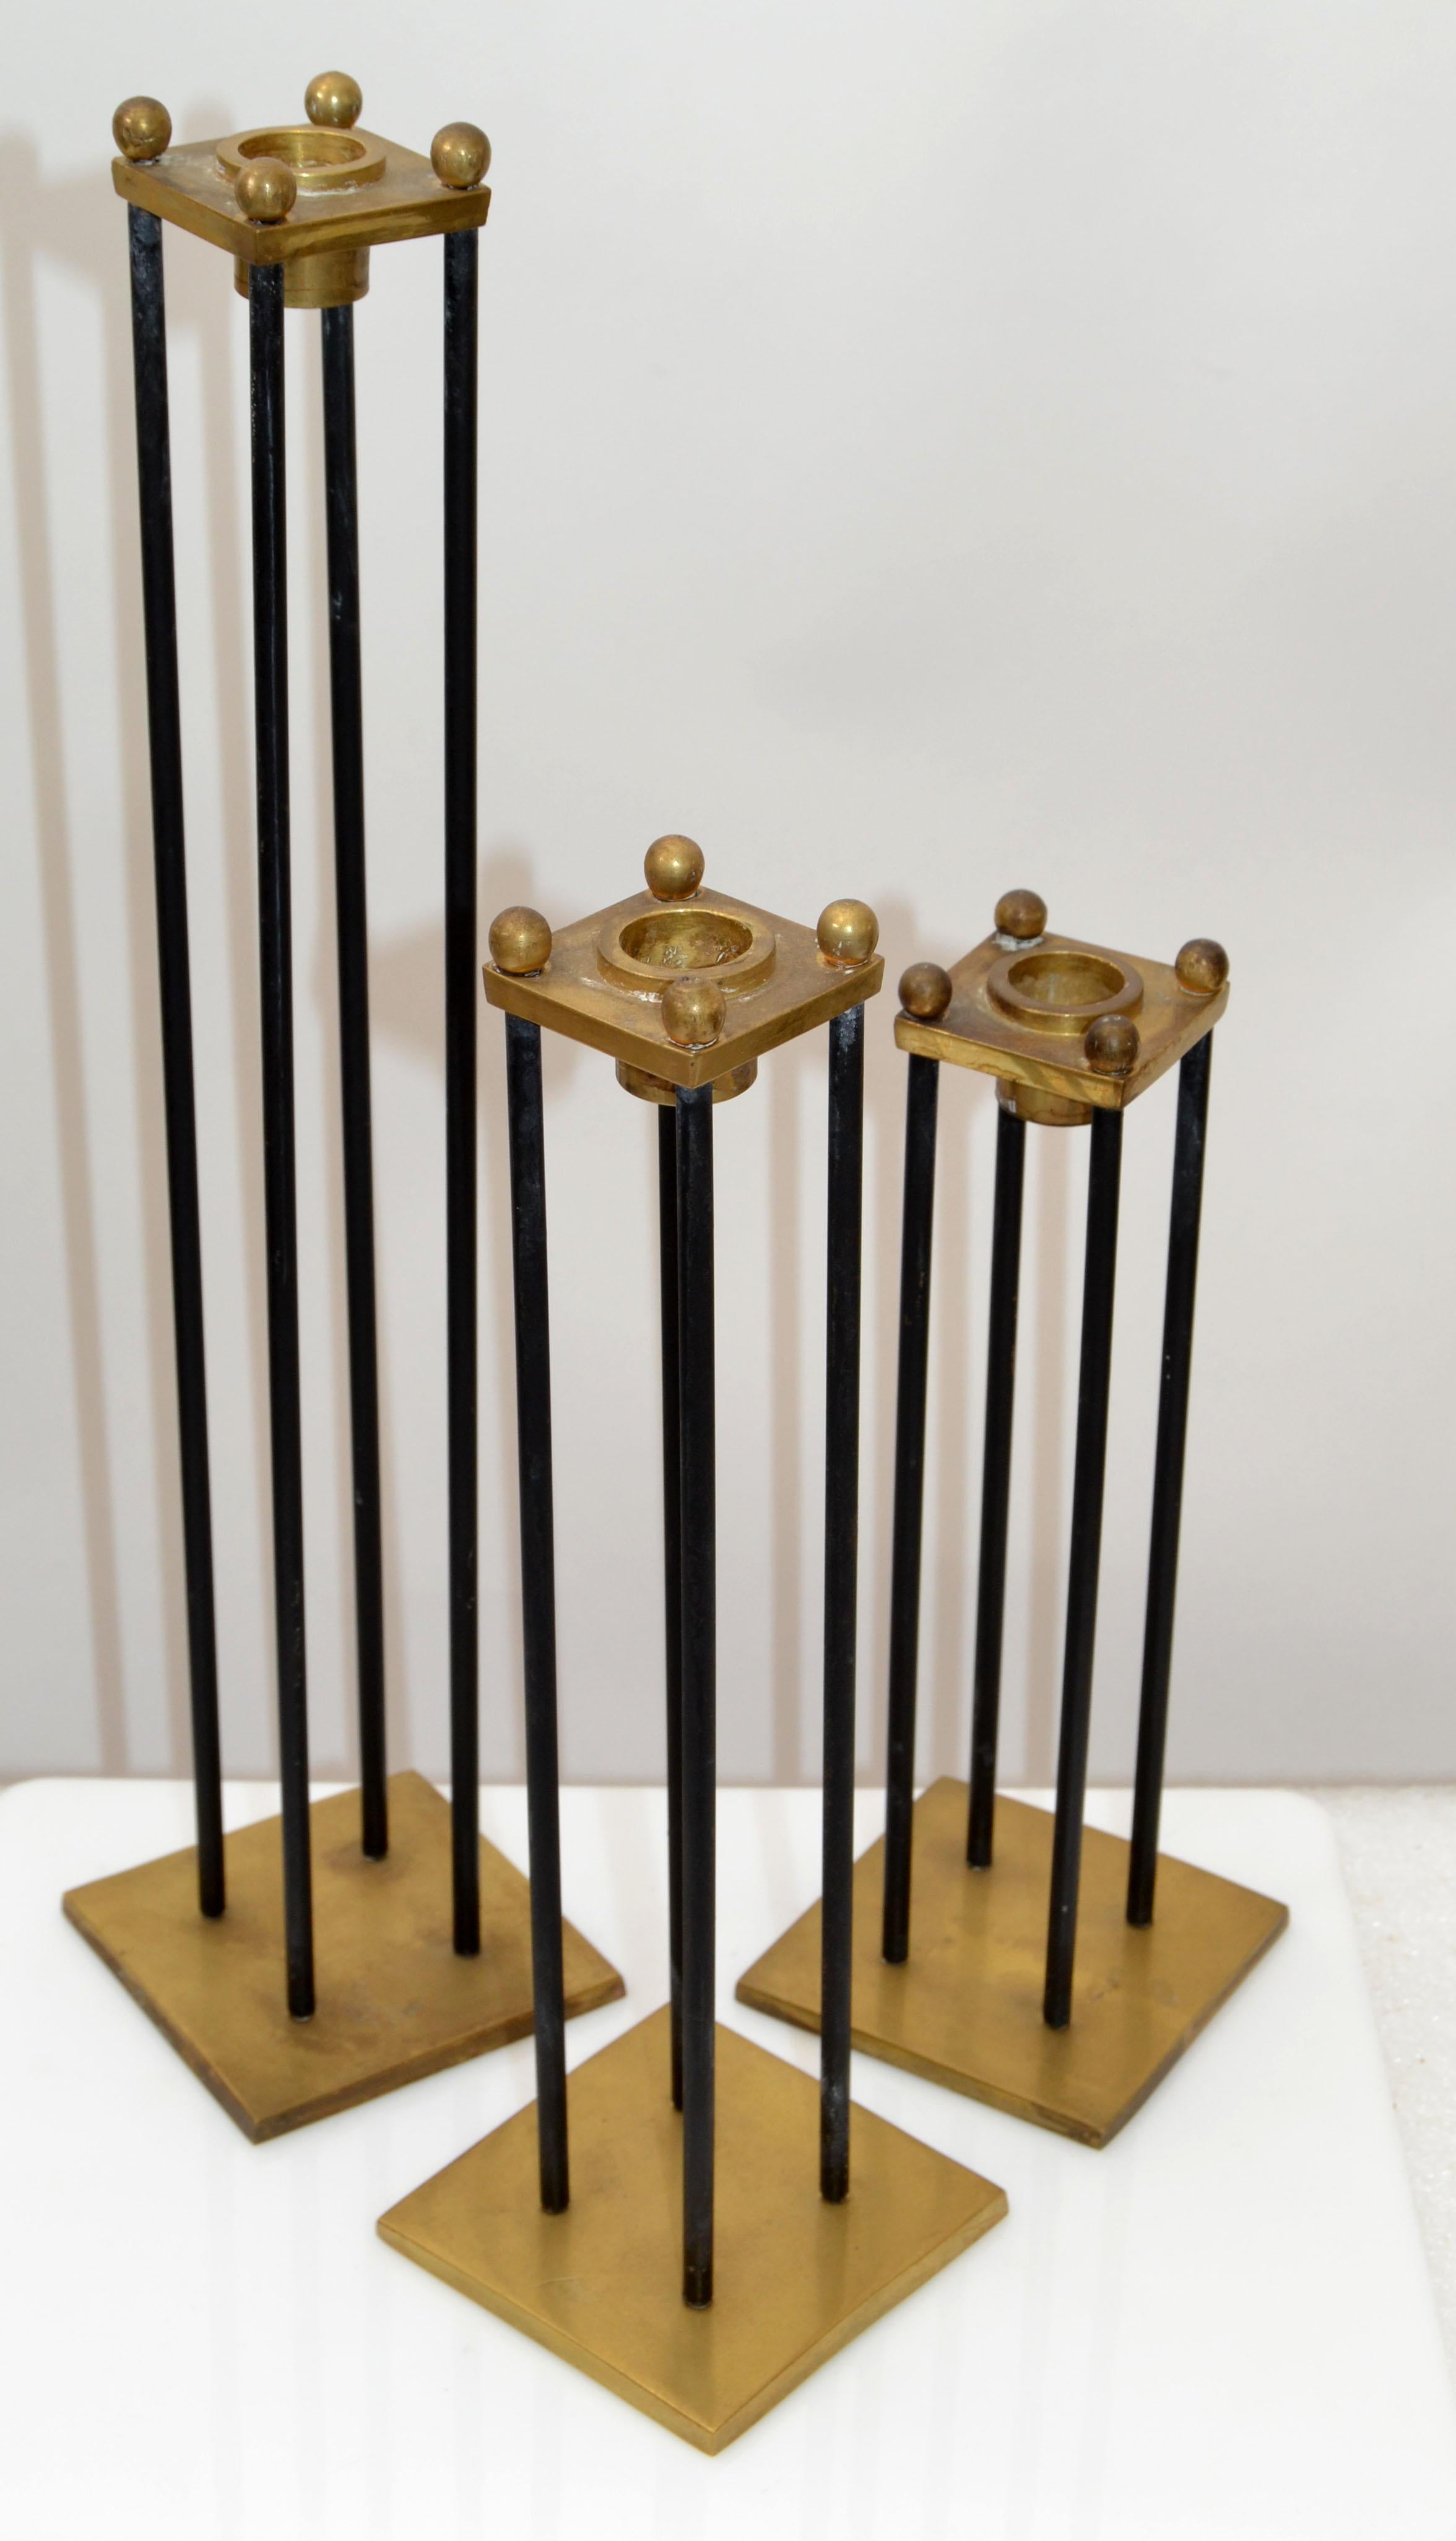 American Mid-Century Modern Brass & Black Enamel Candle Holders, Candlesticks, Set of 3  For Sale